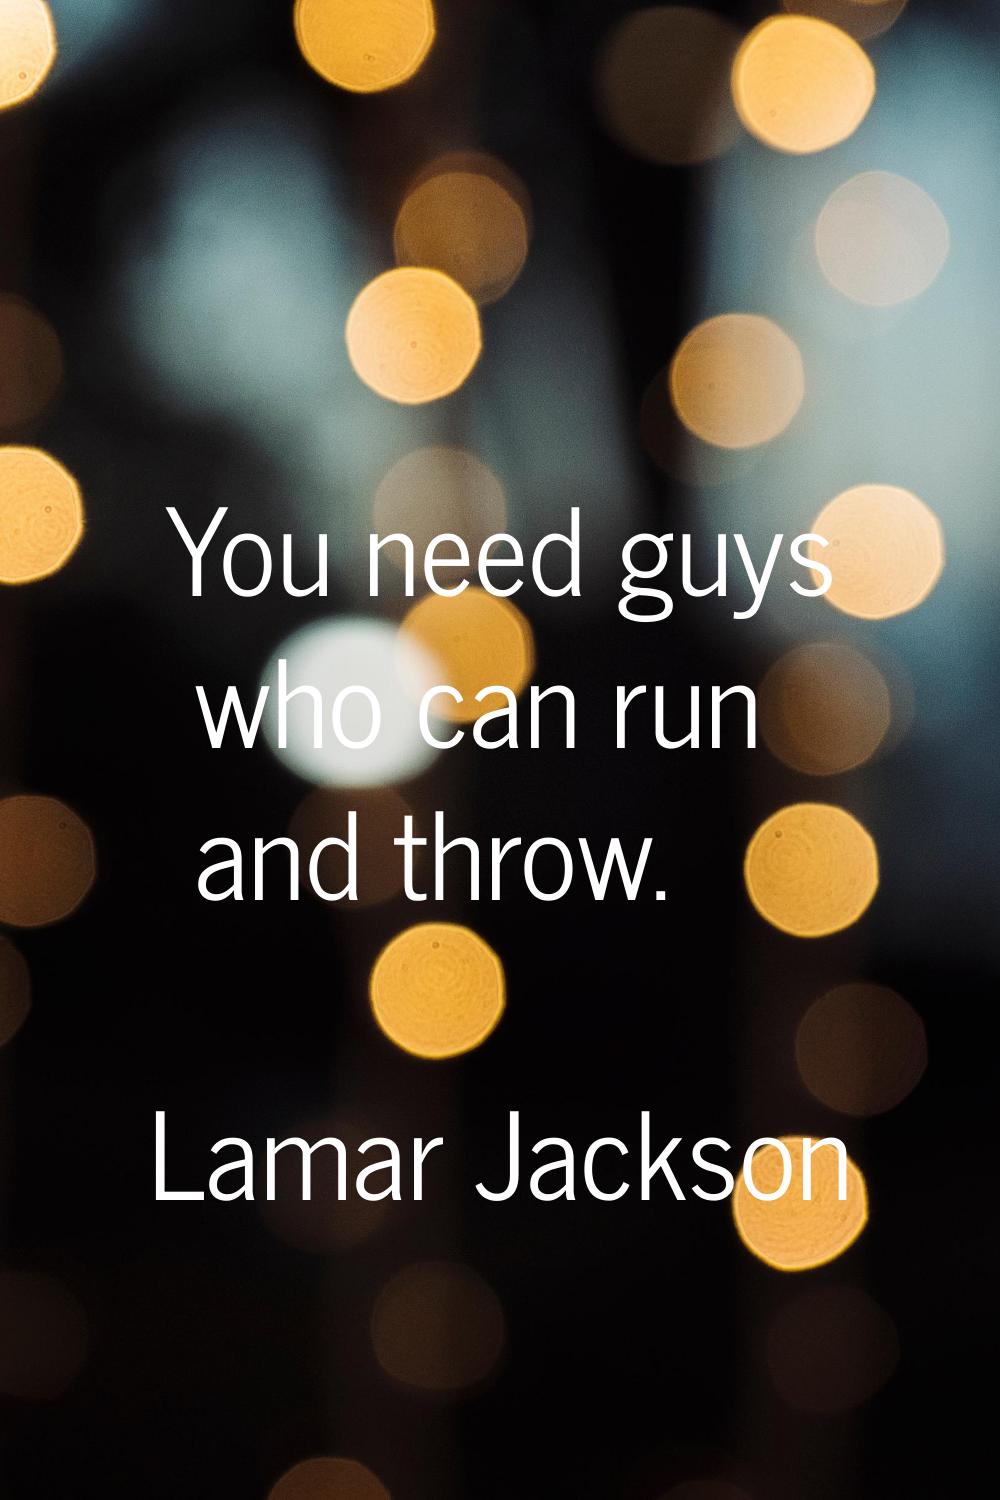 You need guys who can run and throw.